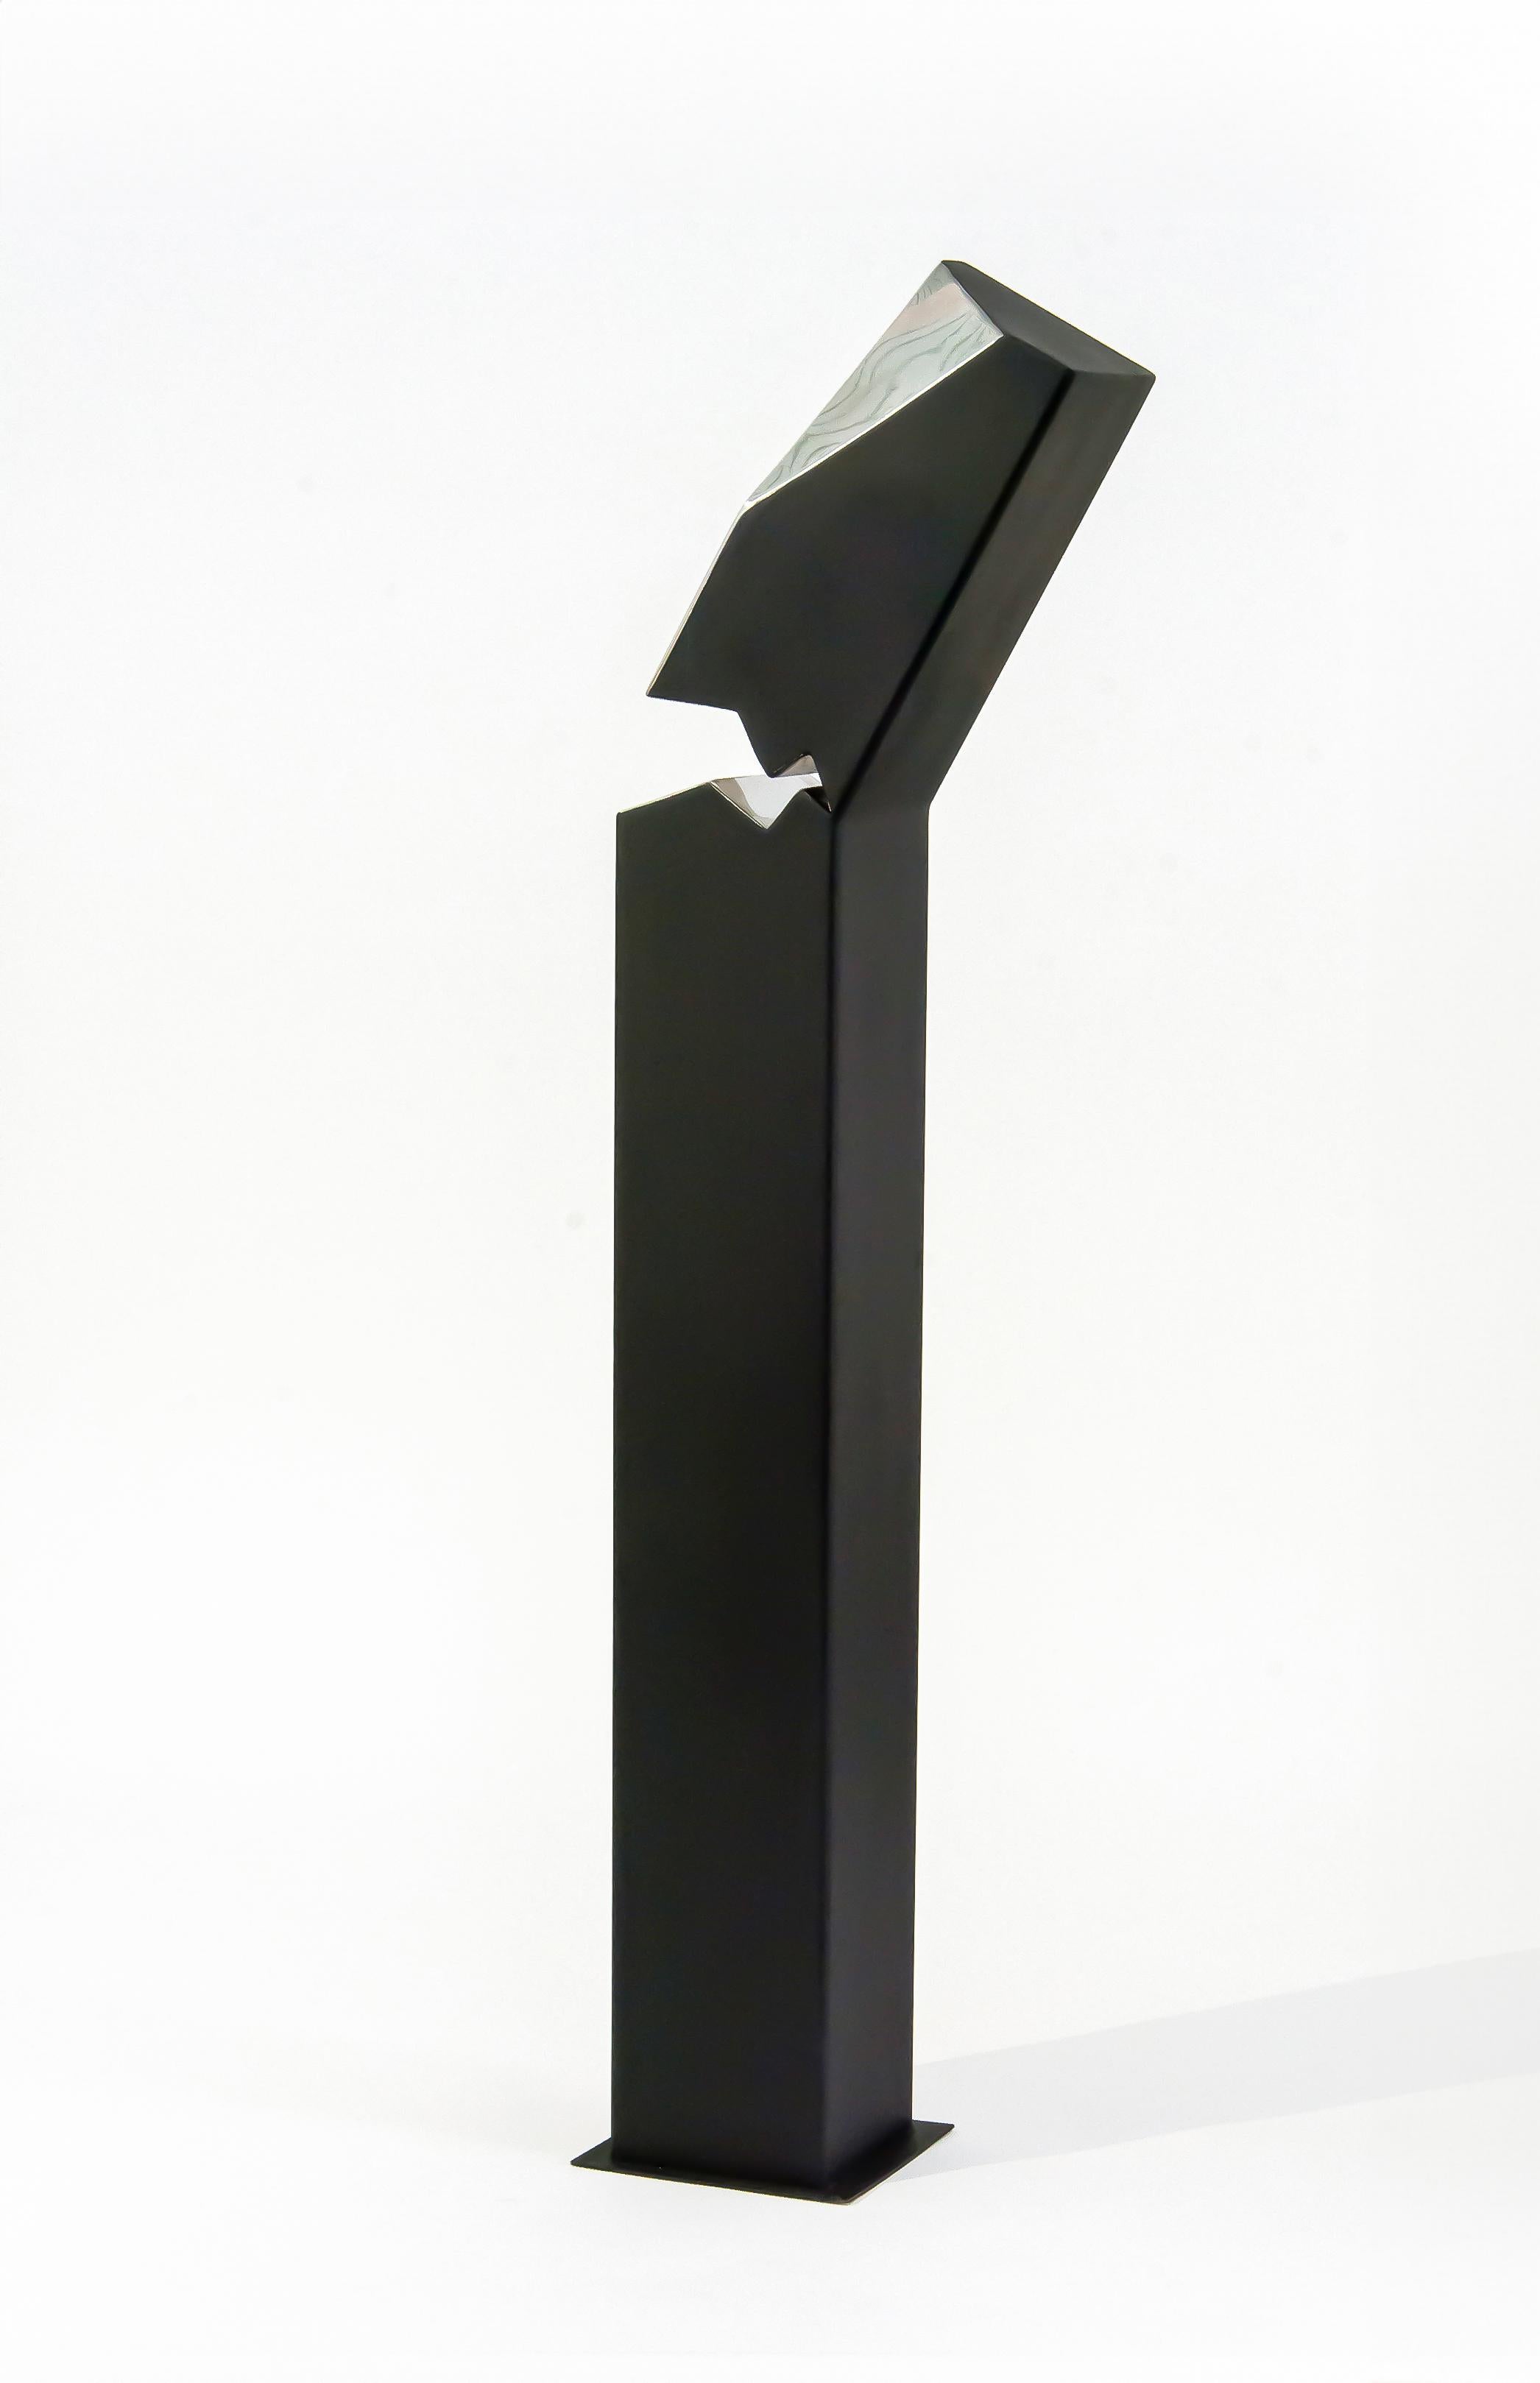 Athabasca Black 2/10- tall, modern, geometric, contemporary, steel sculpture - Sculpture by Philippe Pallafray